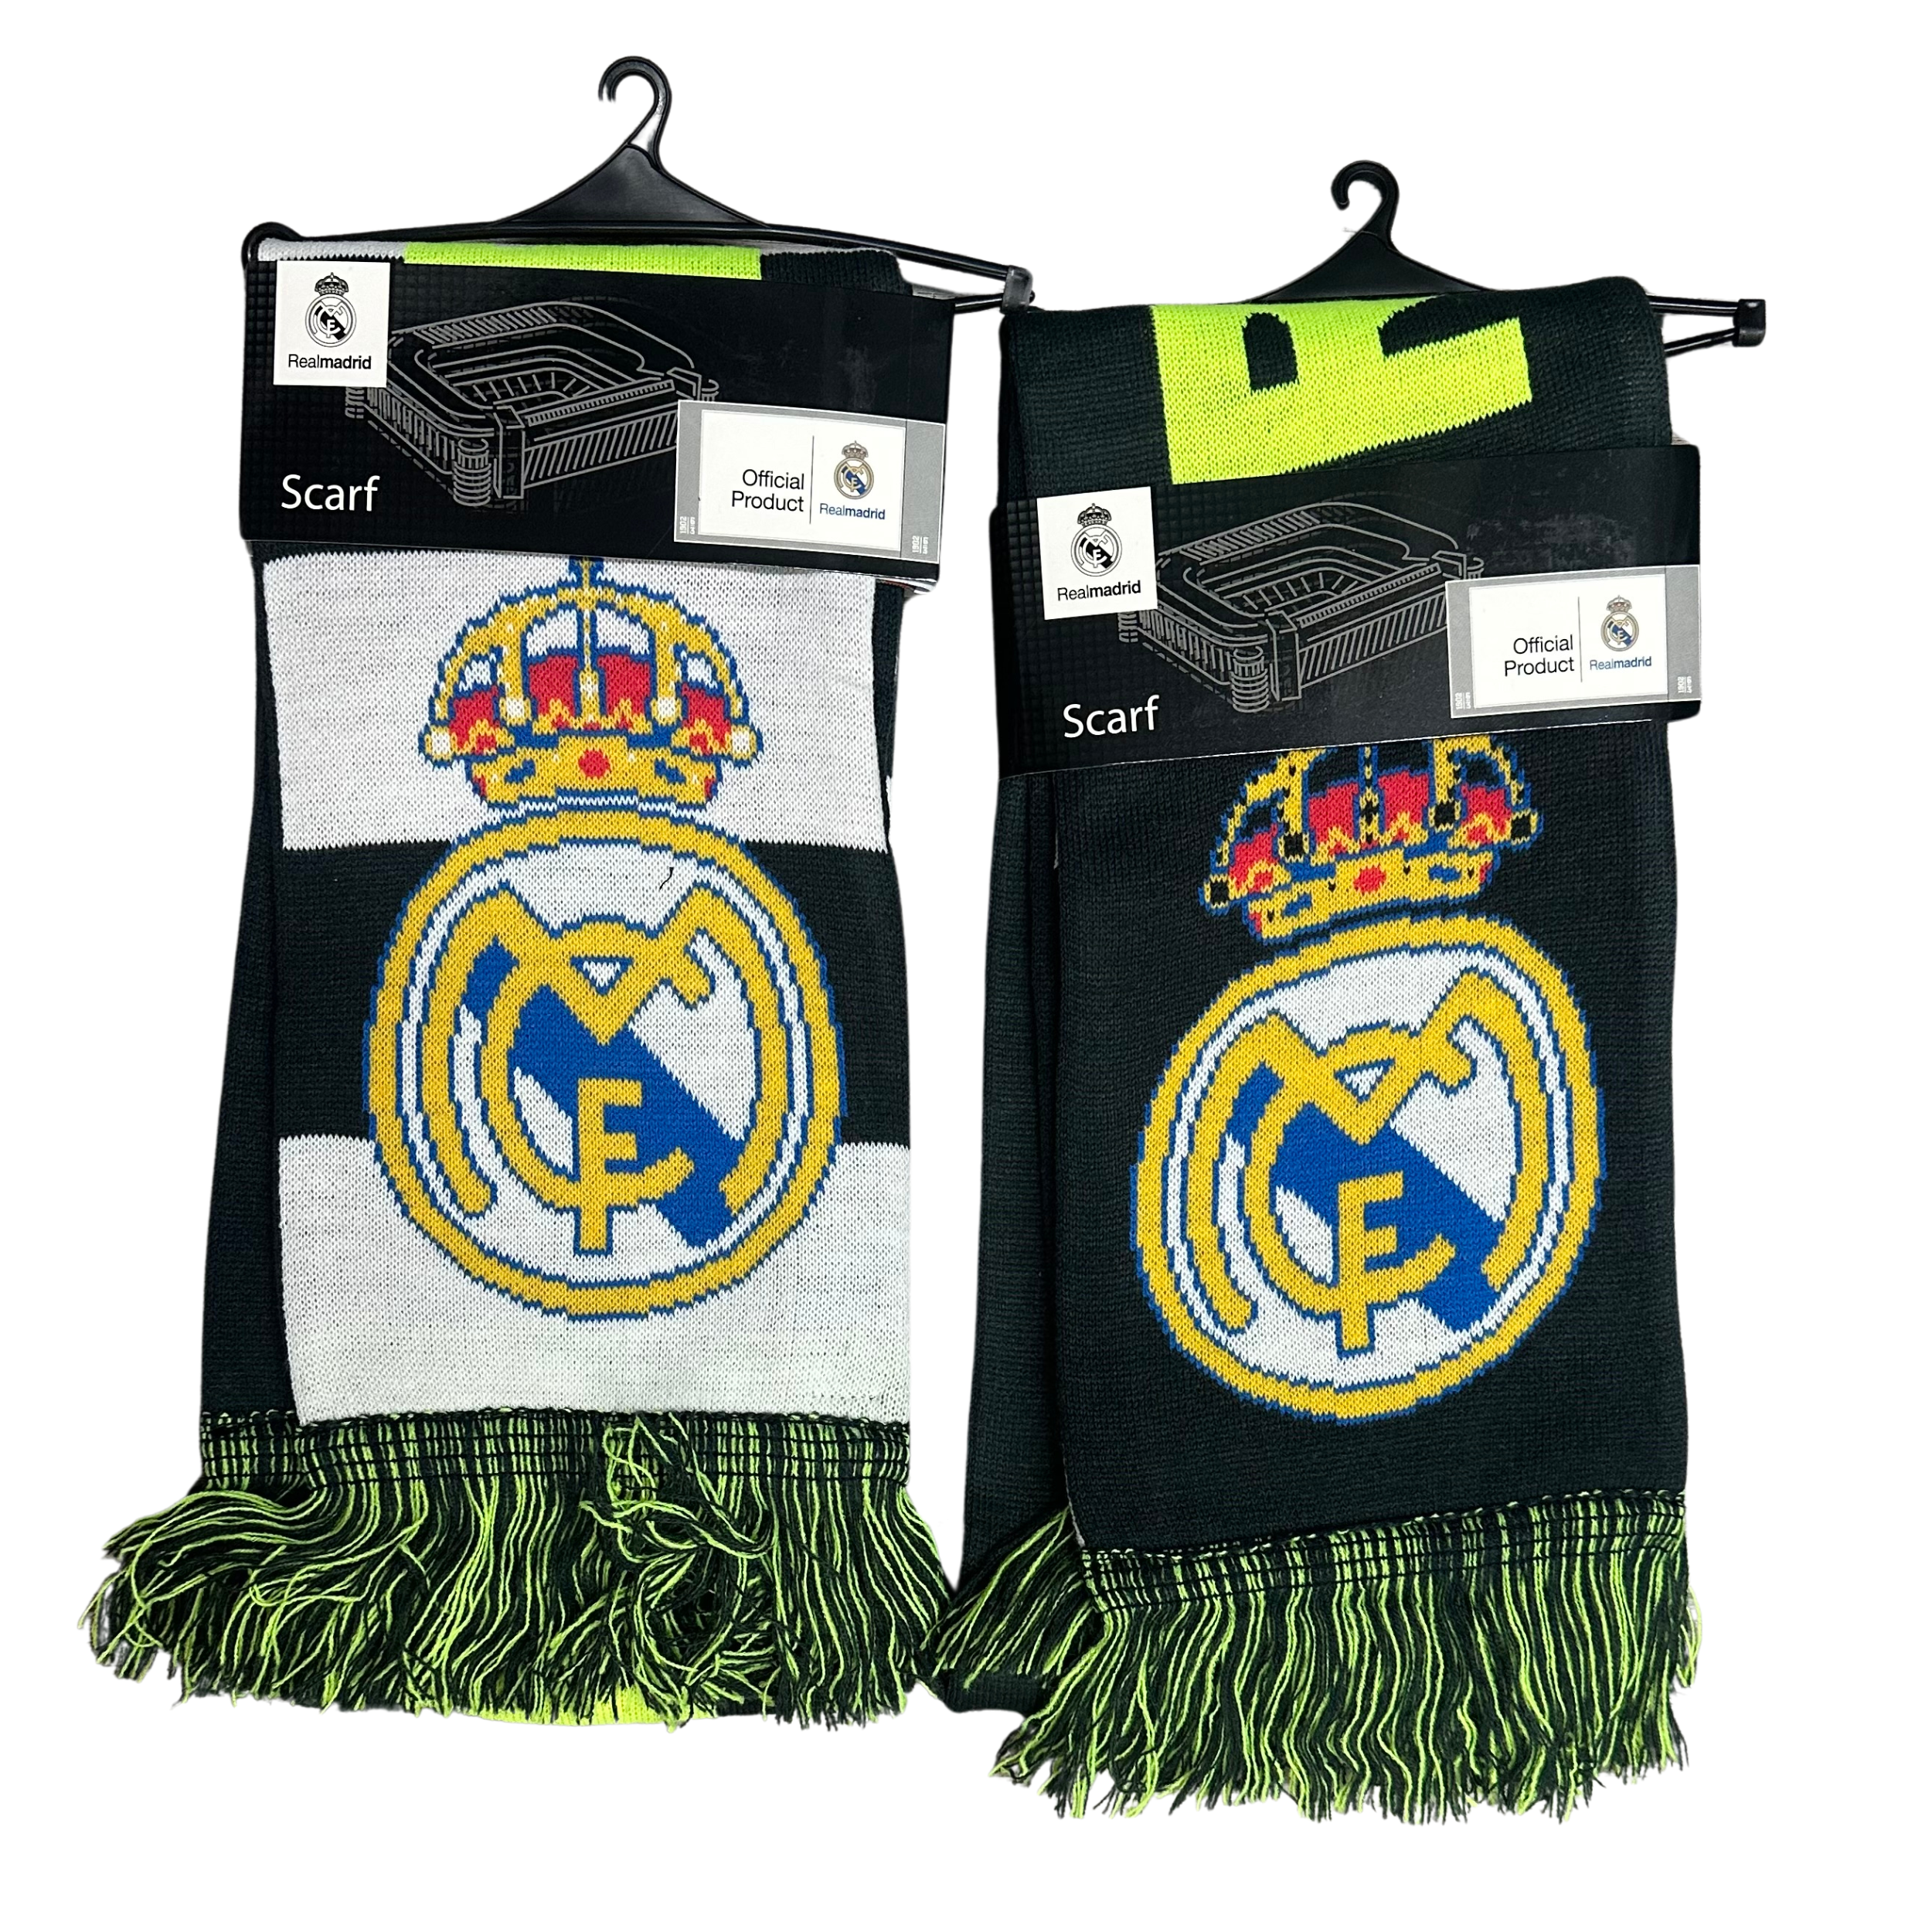 Scarf Real Madrid FC Reversible Scarf Officially Licensed Soccer Winter